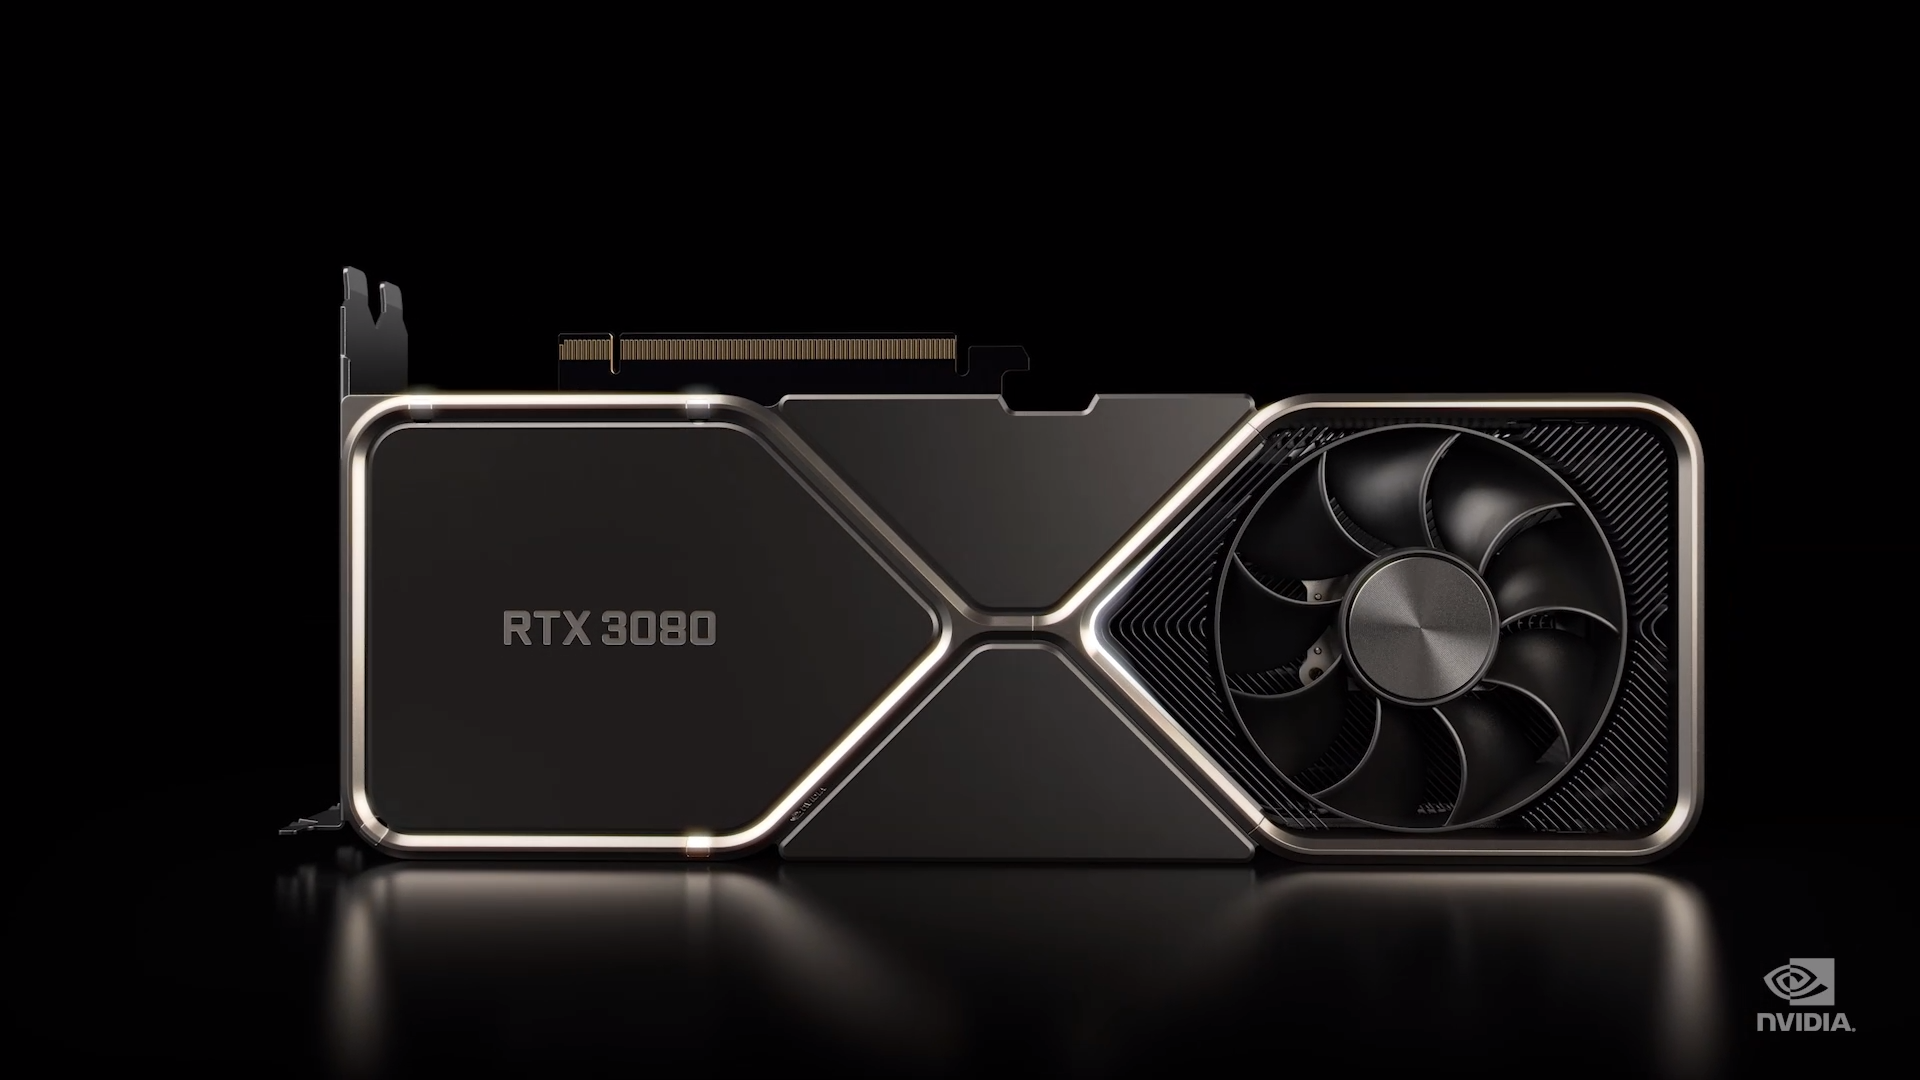 Nvidia Broadcast 'Requires display driver version R455 or later' error fix